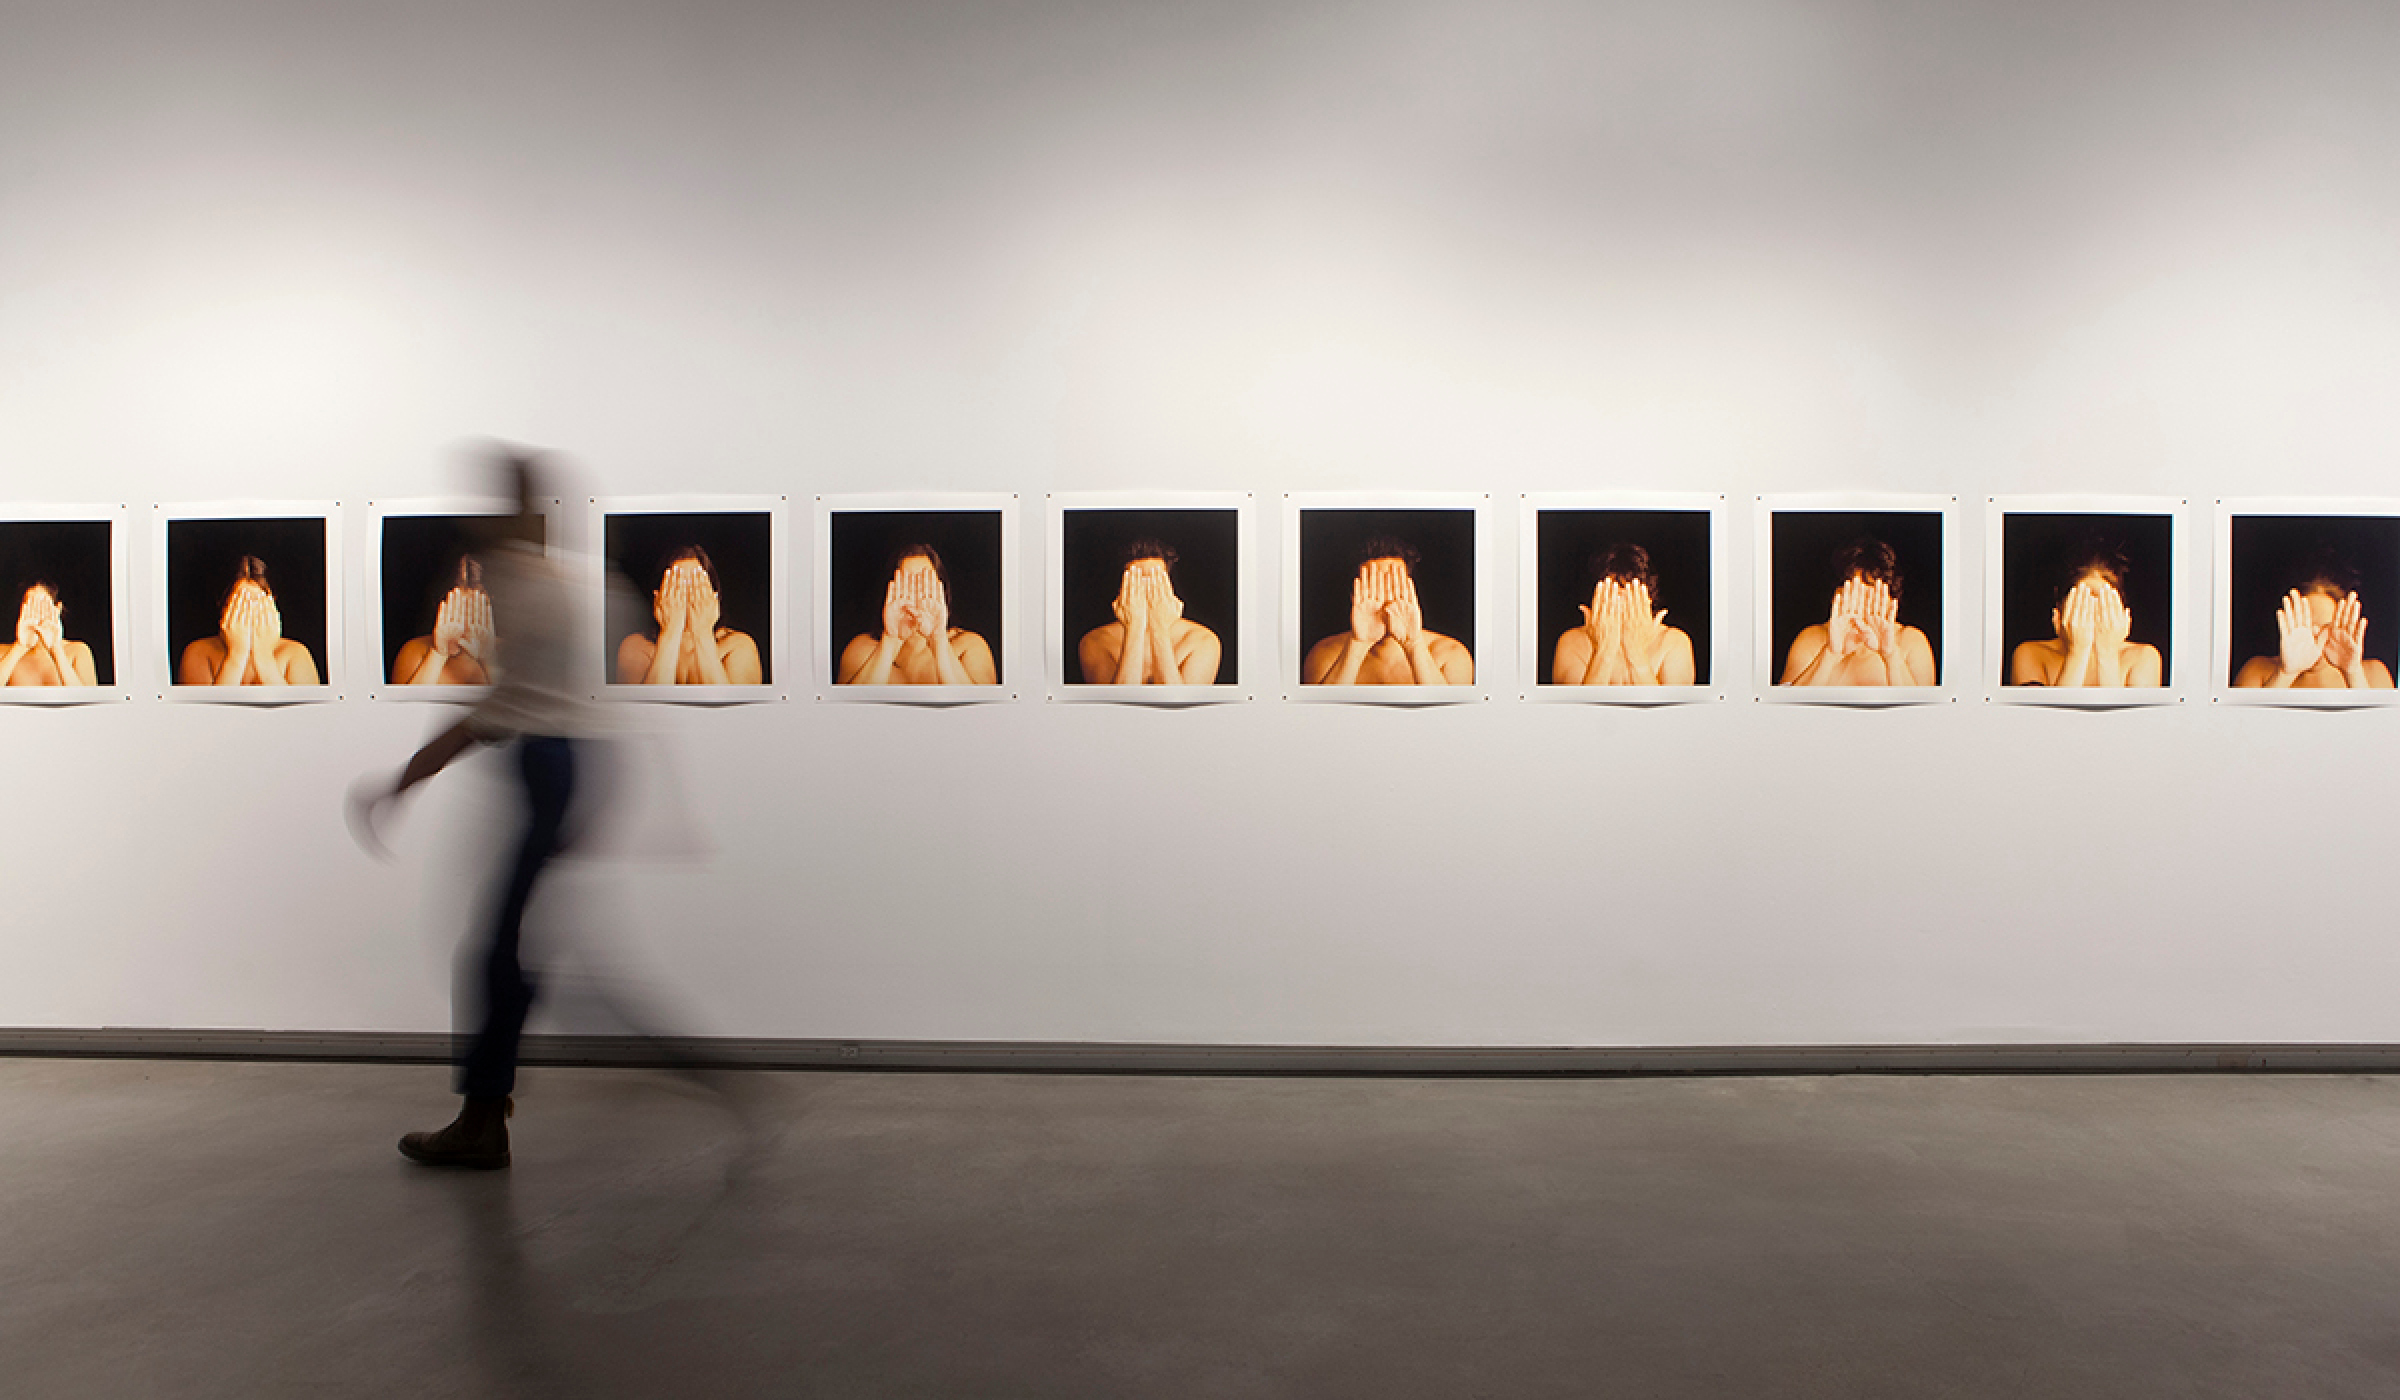 A blurred person walks in front of a wall featuring the photographic series Grace (2006). The artworks on display are photos of figures with hands covering their faces. Installation view of I'm Not Your Kind of Princess at Plug In ICA.